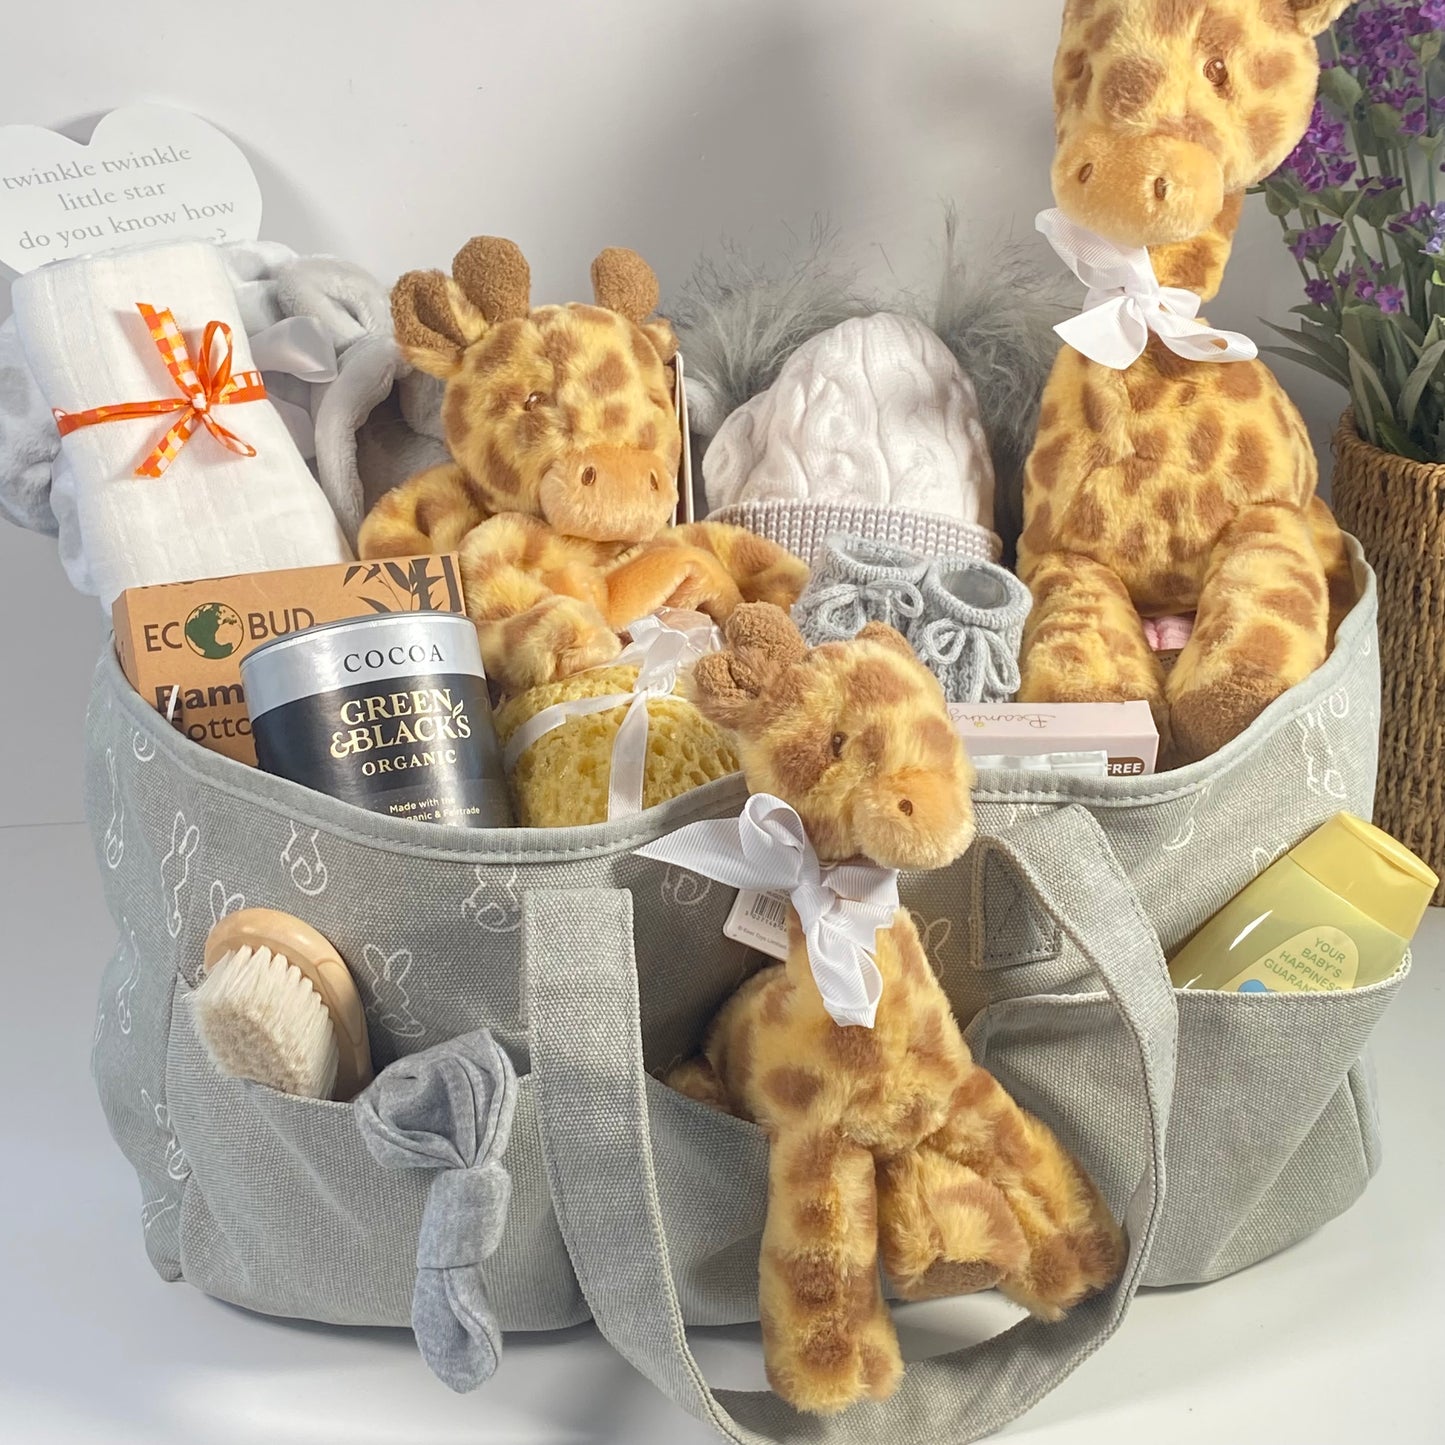 Twins Unisex Baby Hamper, Nappy Caddy, Giraffe Gifts, Baby Comforter, Baby Blanket, Eco Baby Essentials, Baby Dressing Gown, Corporate Baby Hamper, New Parents Gifts, New Mum Gifts.